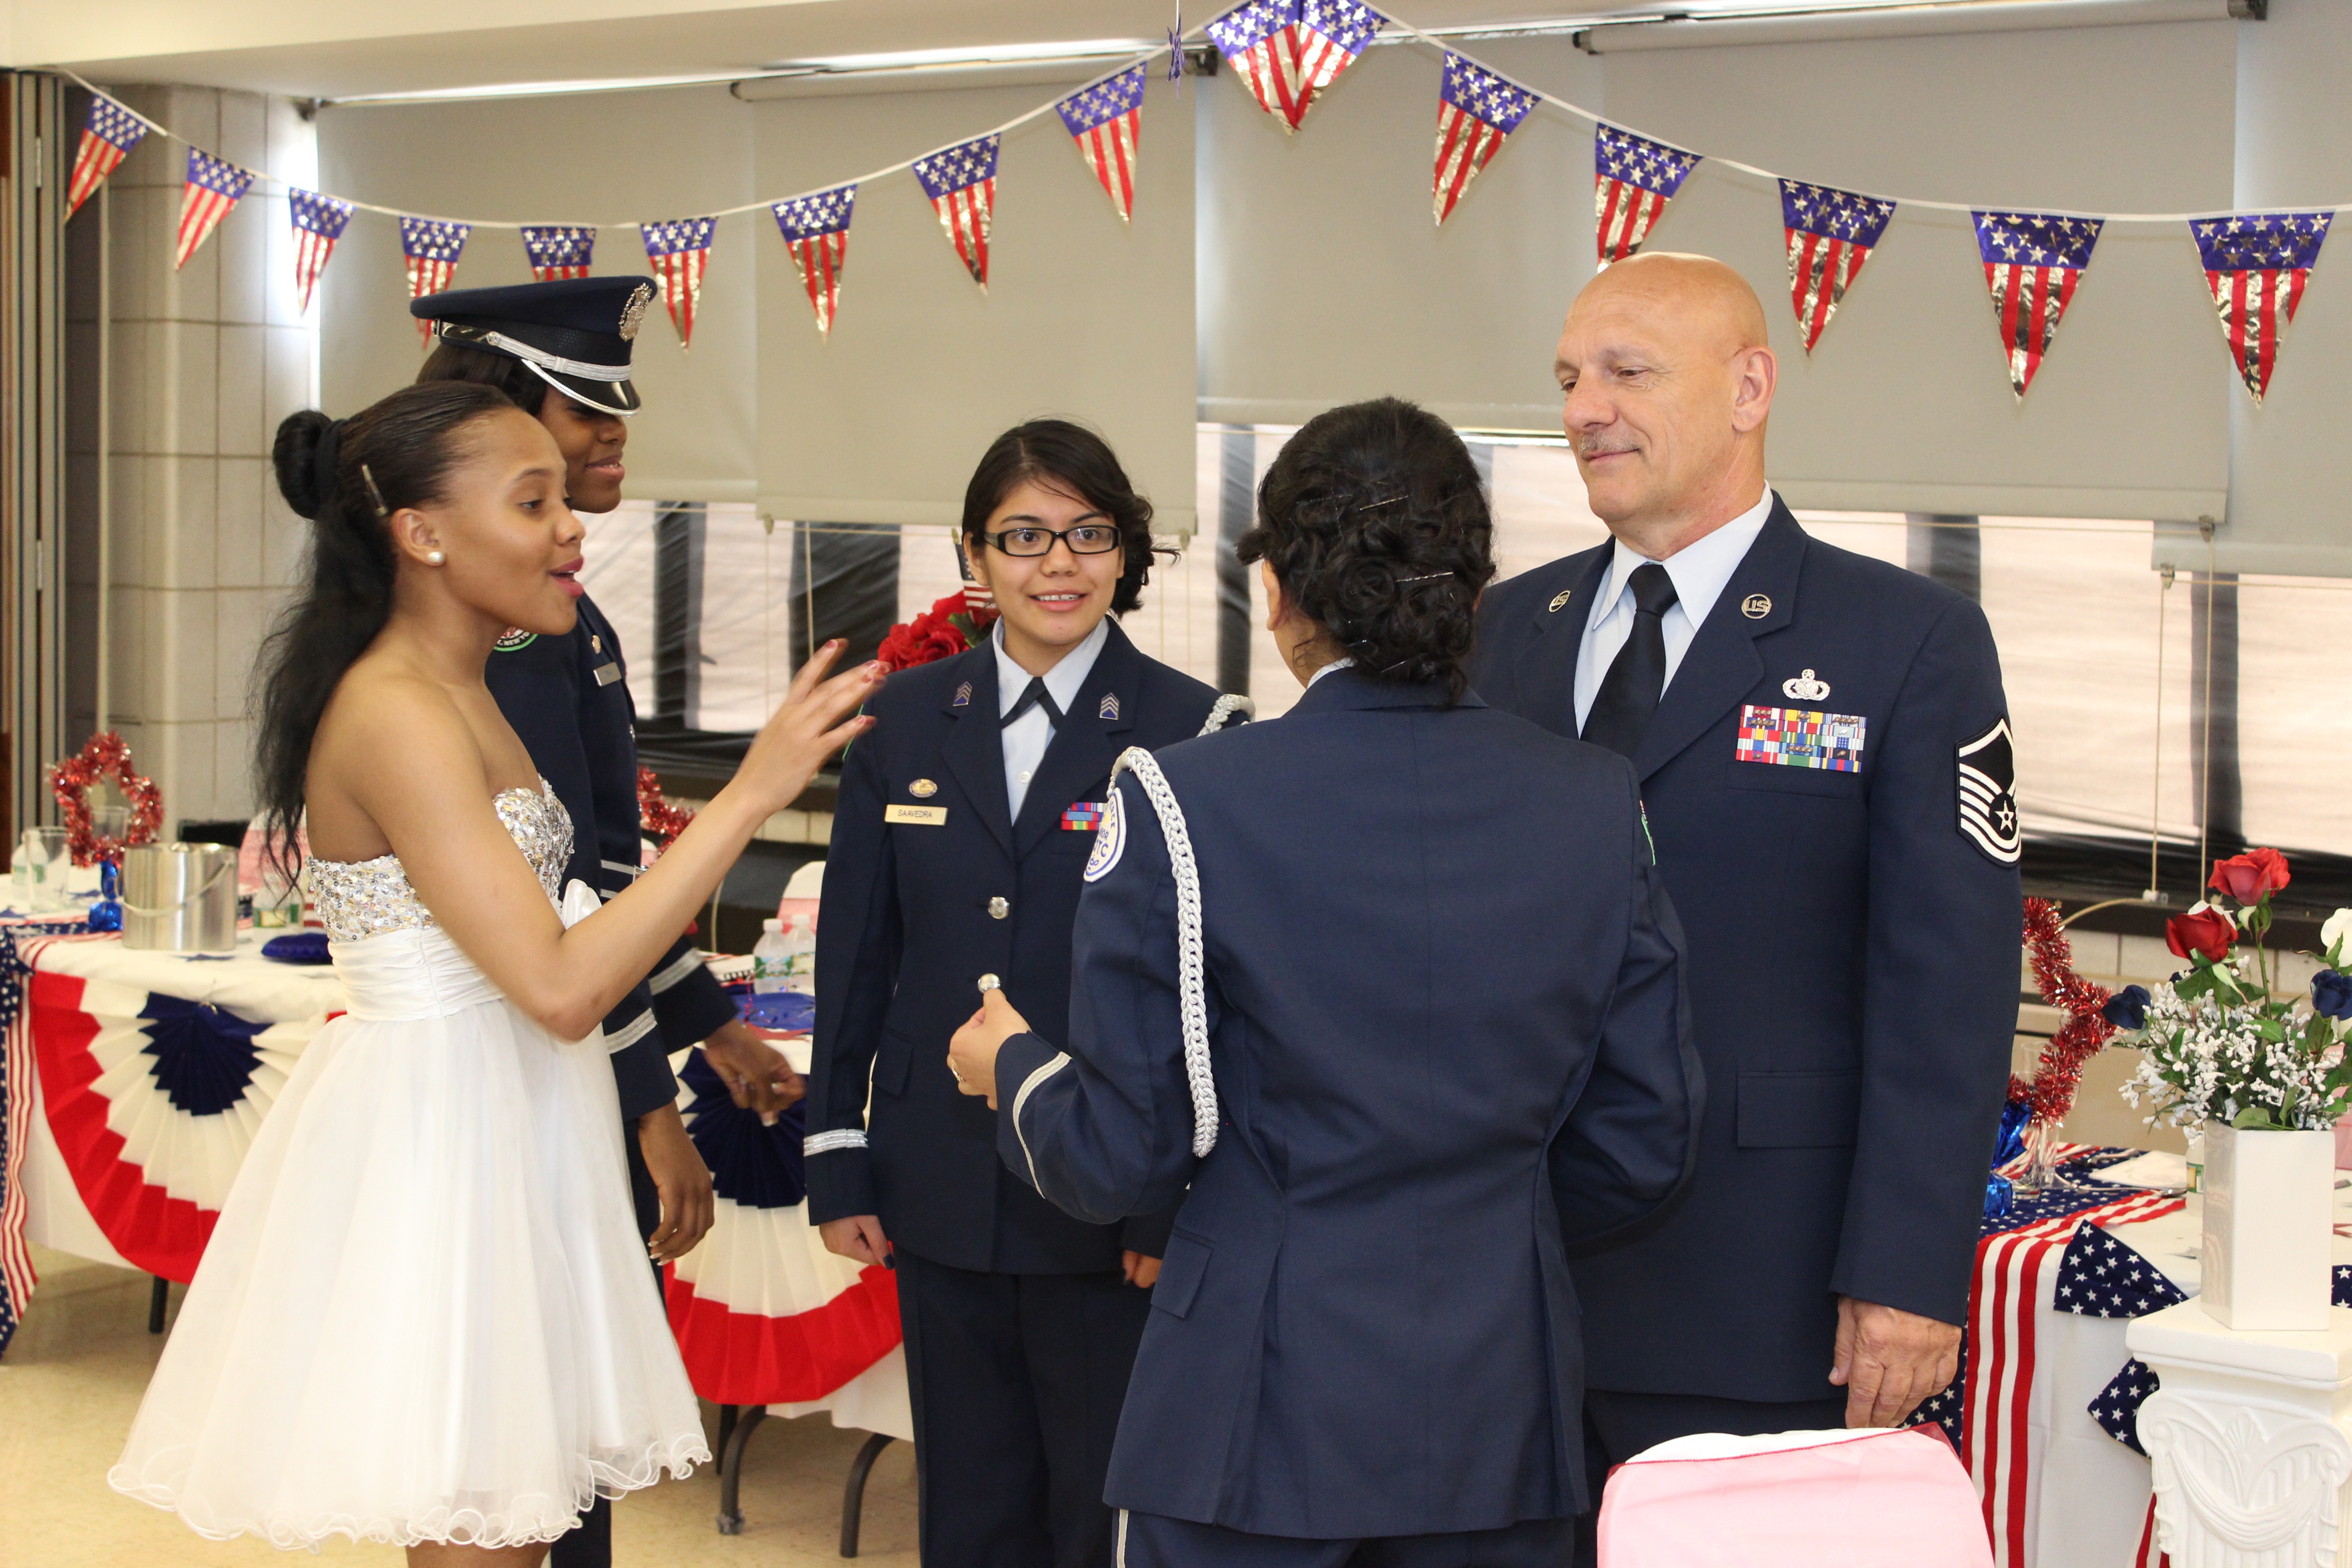 Air Force JROTC Program Hosts Military Ball and Dining Out Harry S